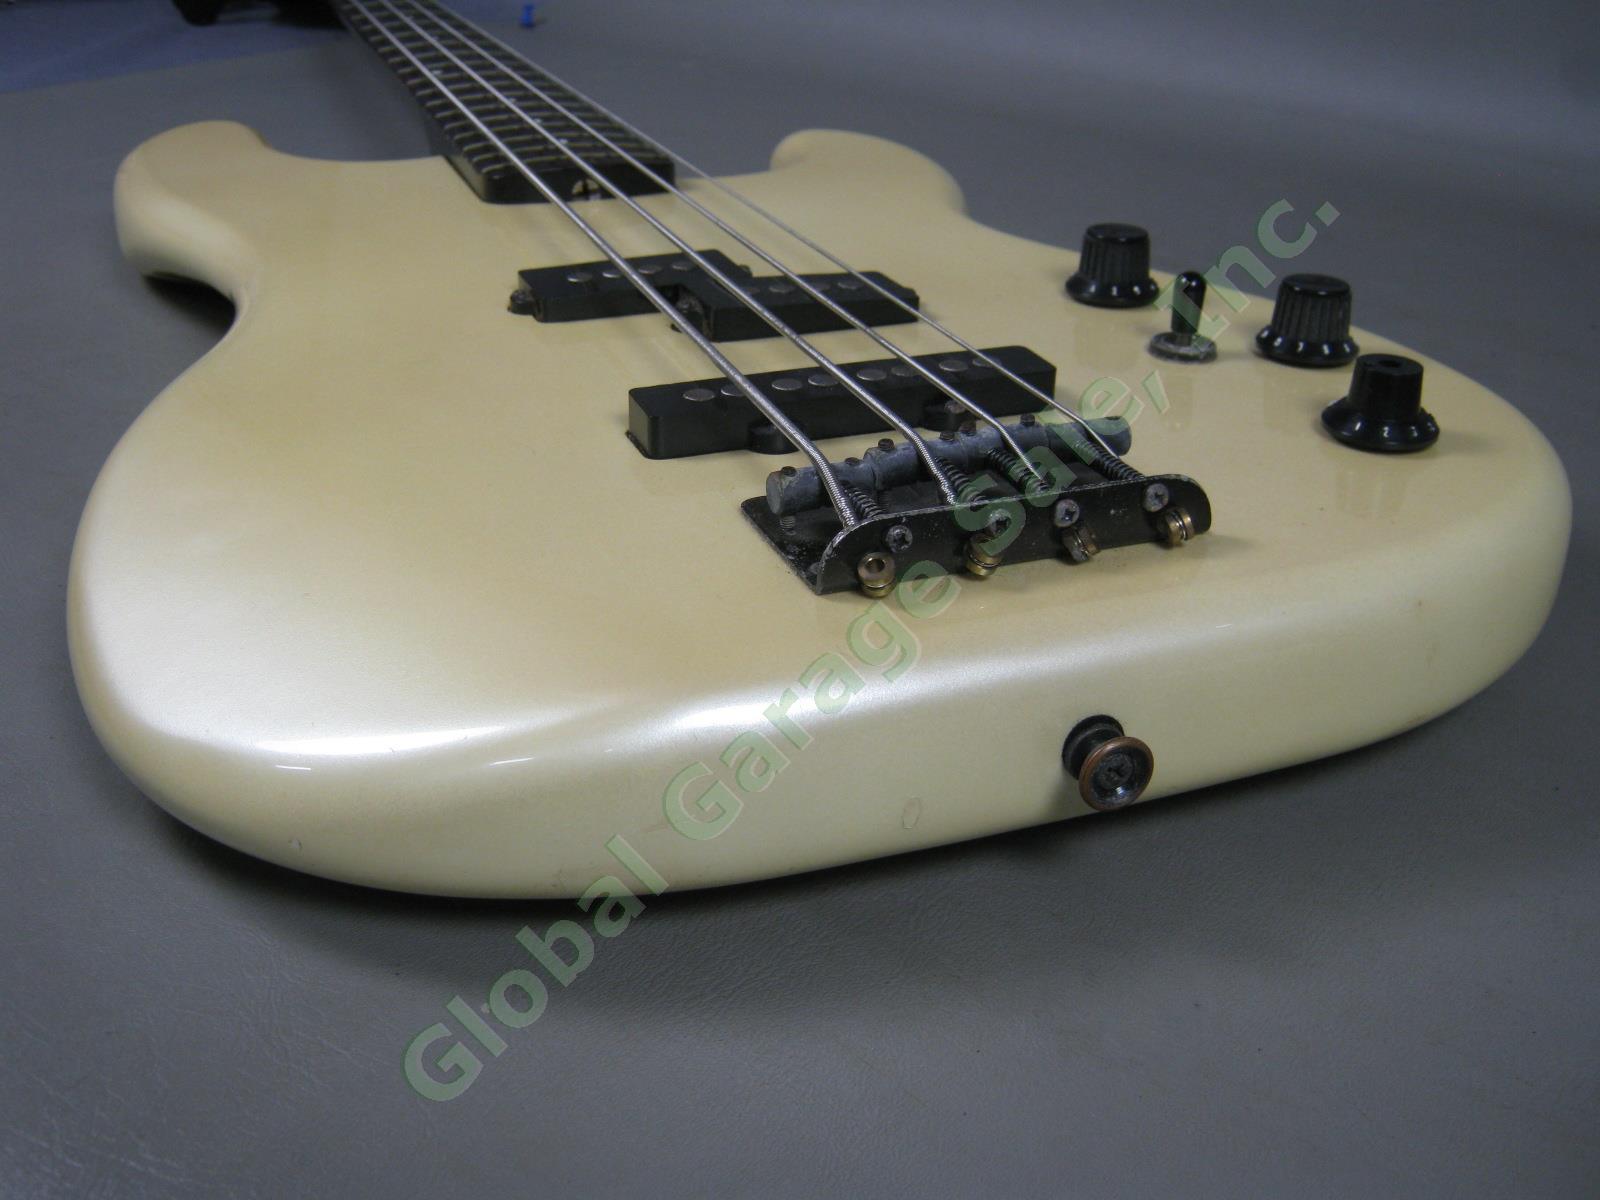 Vtg 1986 Fender Electric Jazz Bass Special MIJ One Owner! Exc Cond! No Reserve! 6